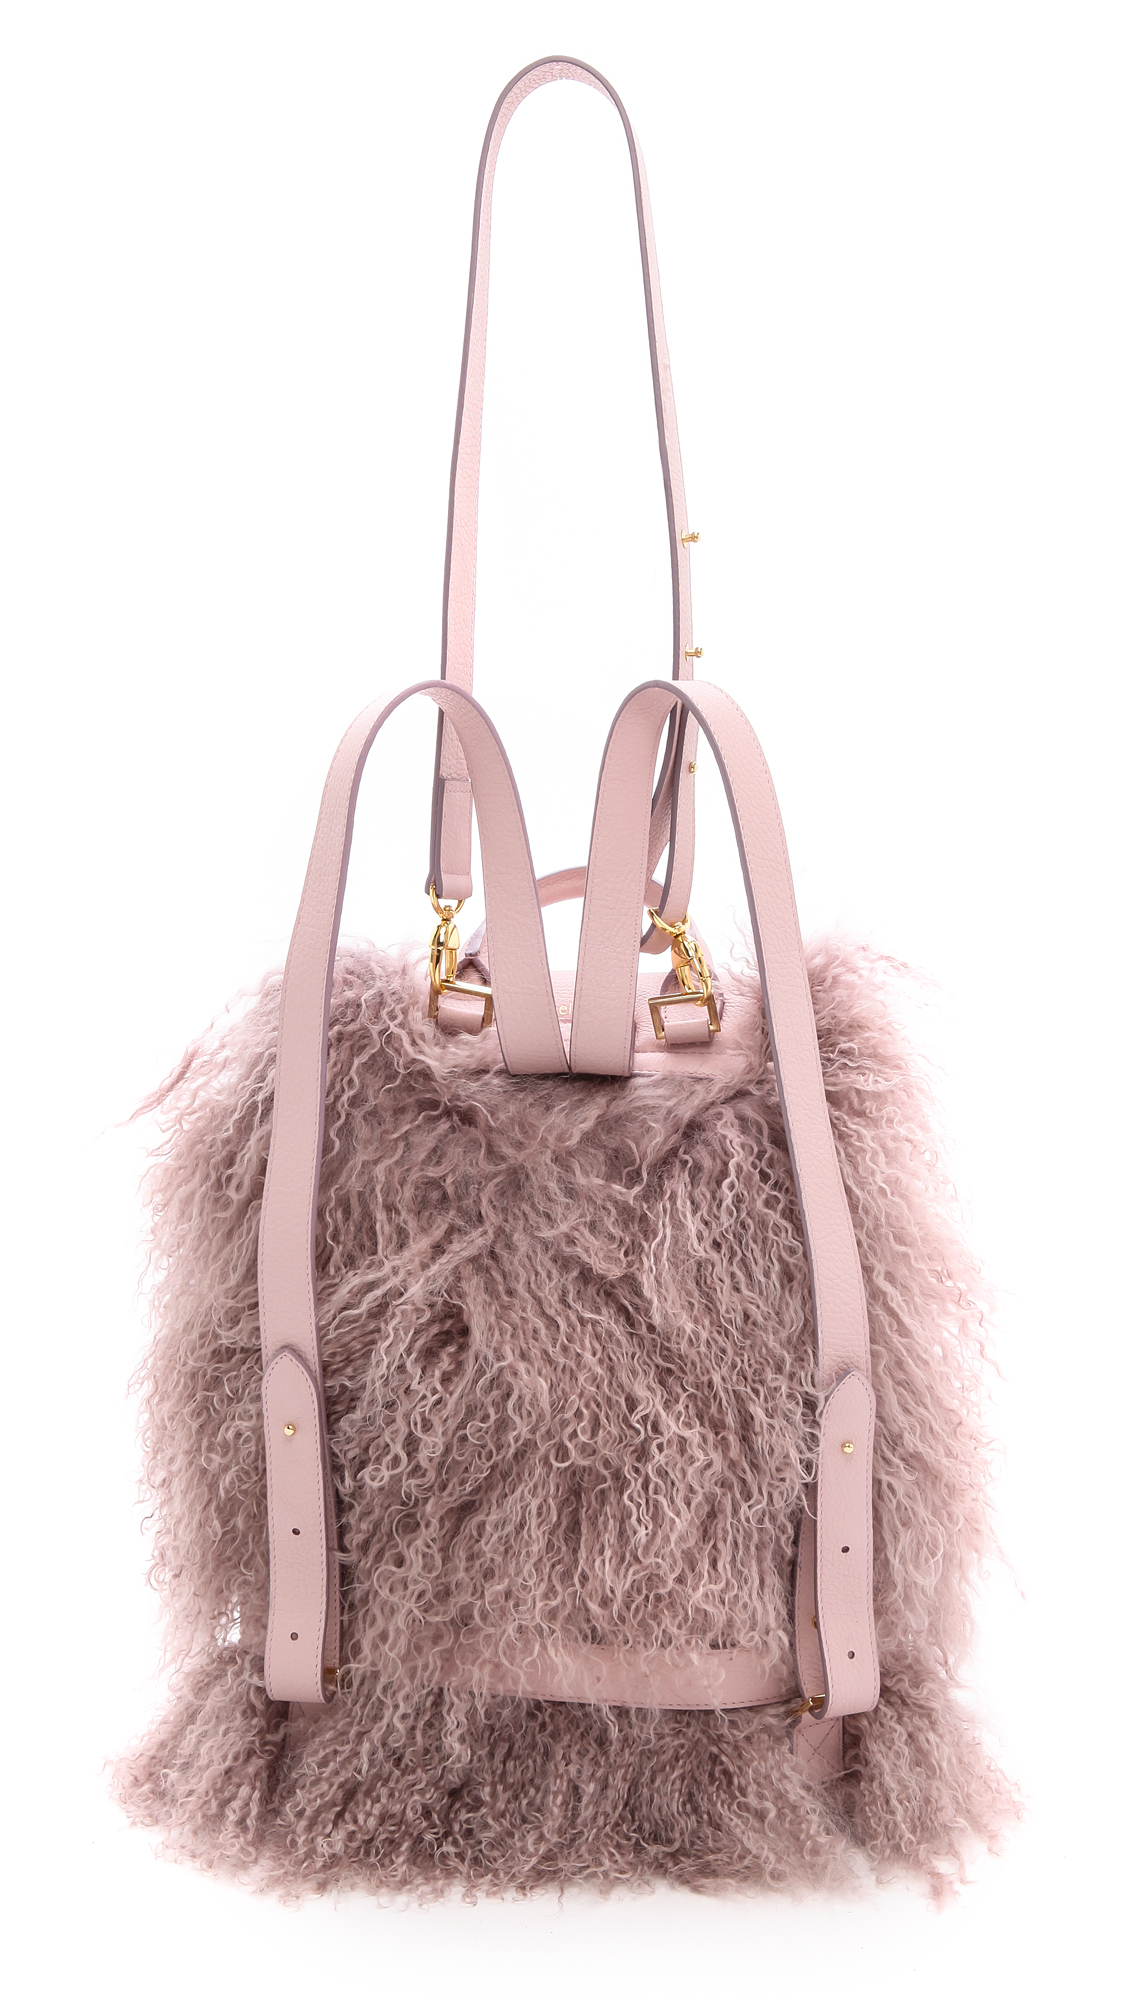 Lyst - Meli Melo Shearling Thela Backpack - Dusty Pink in Pink